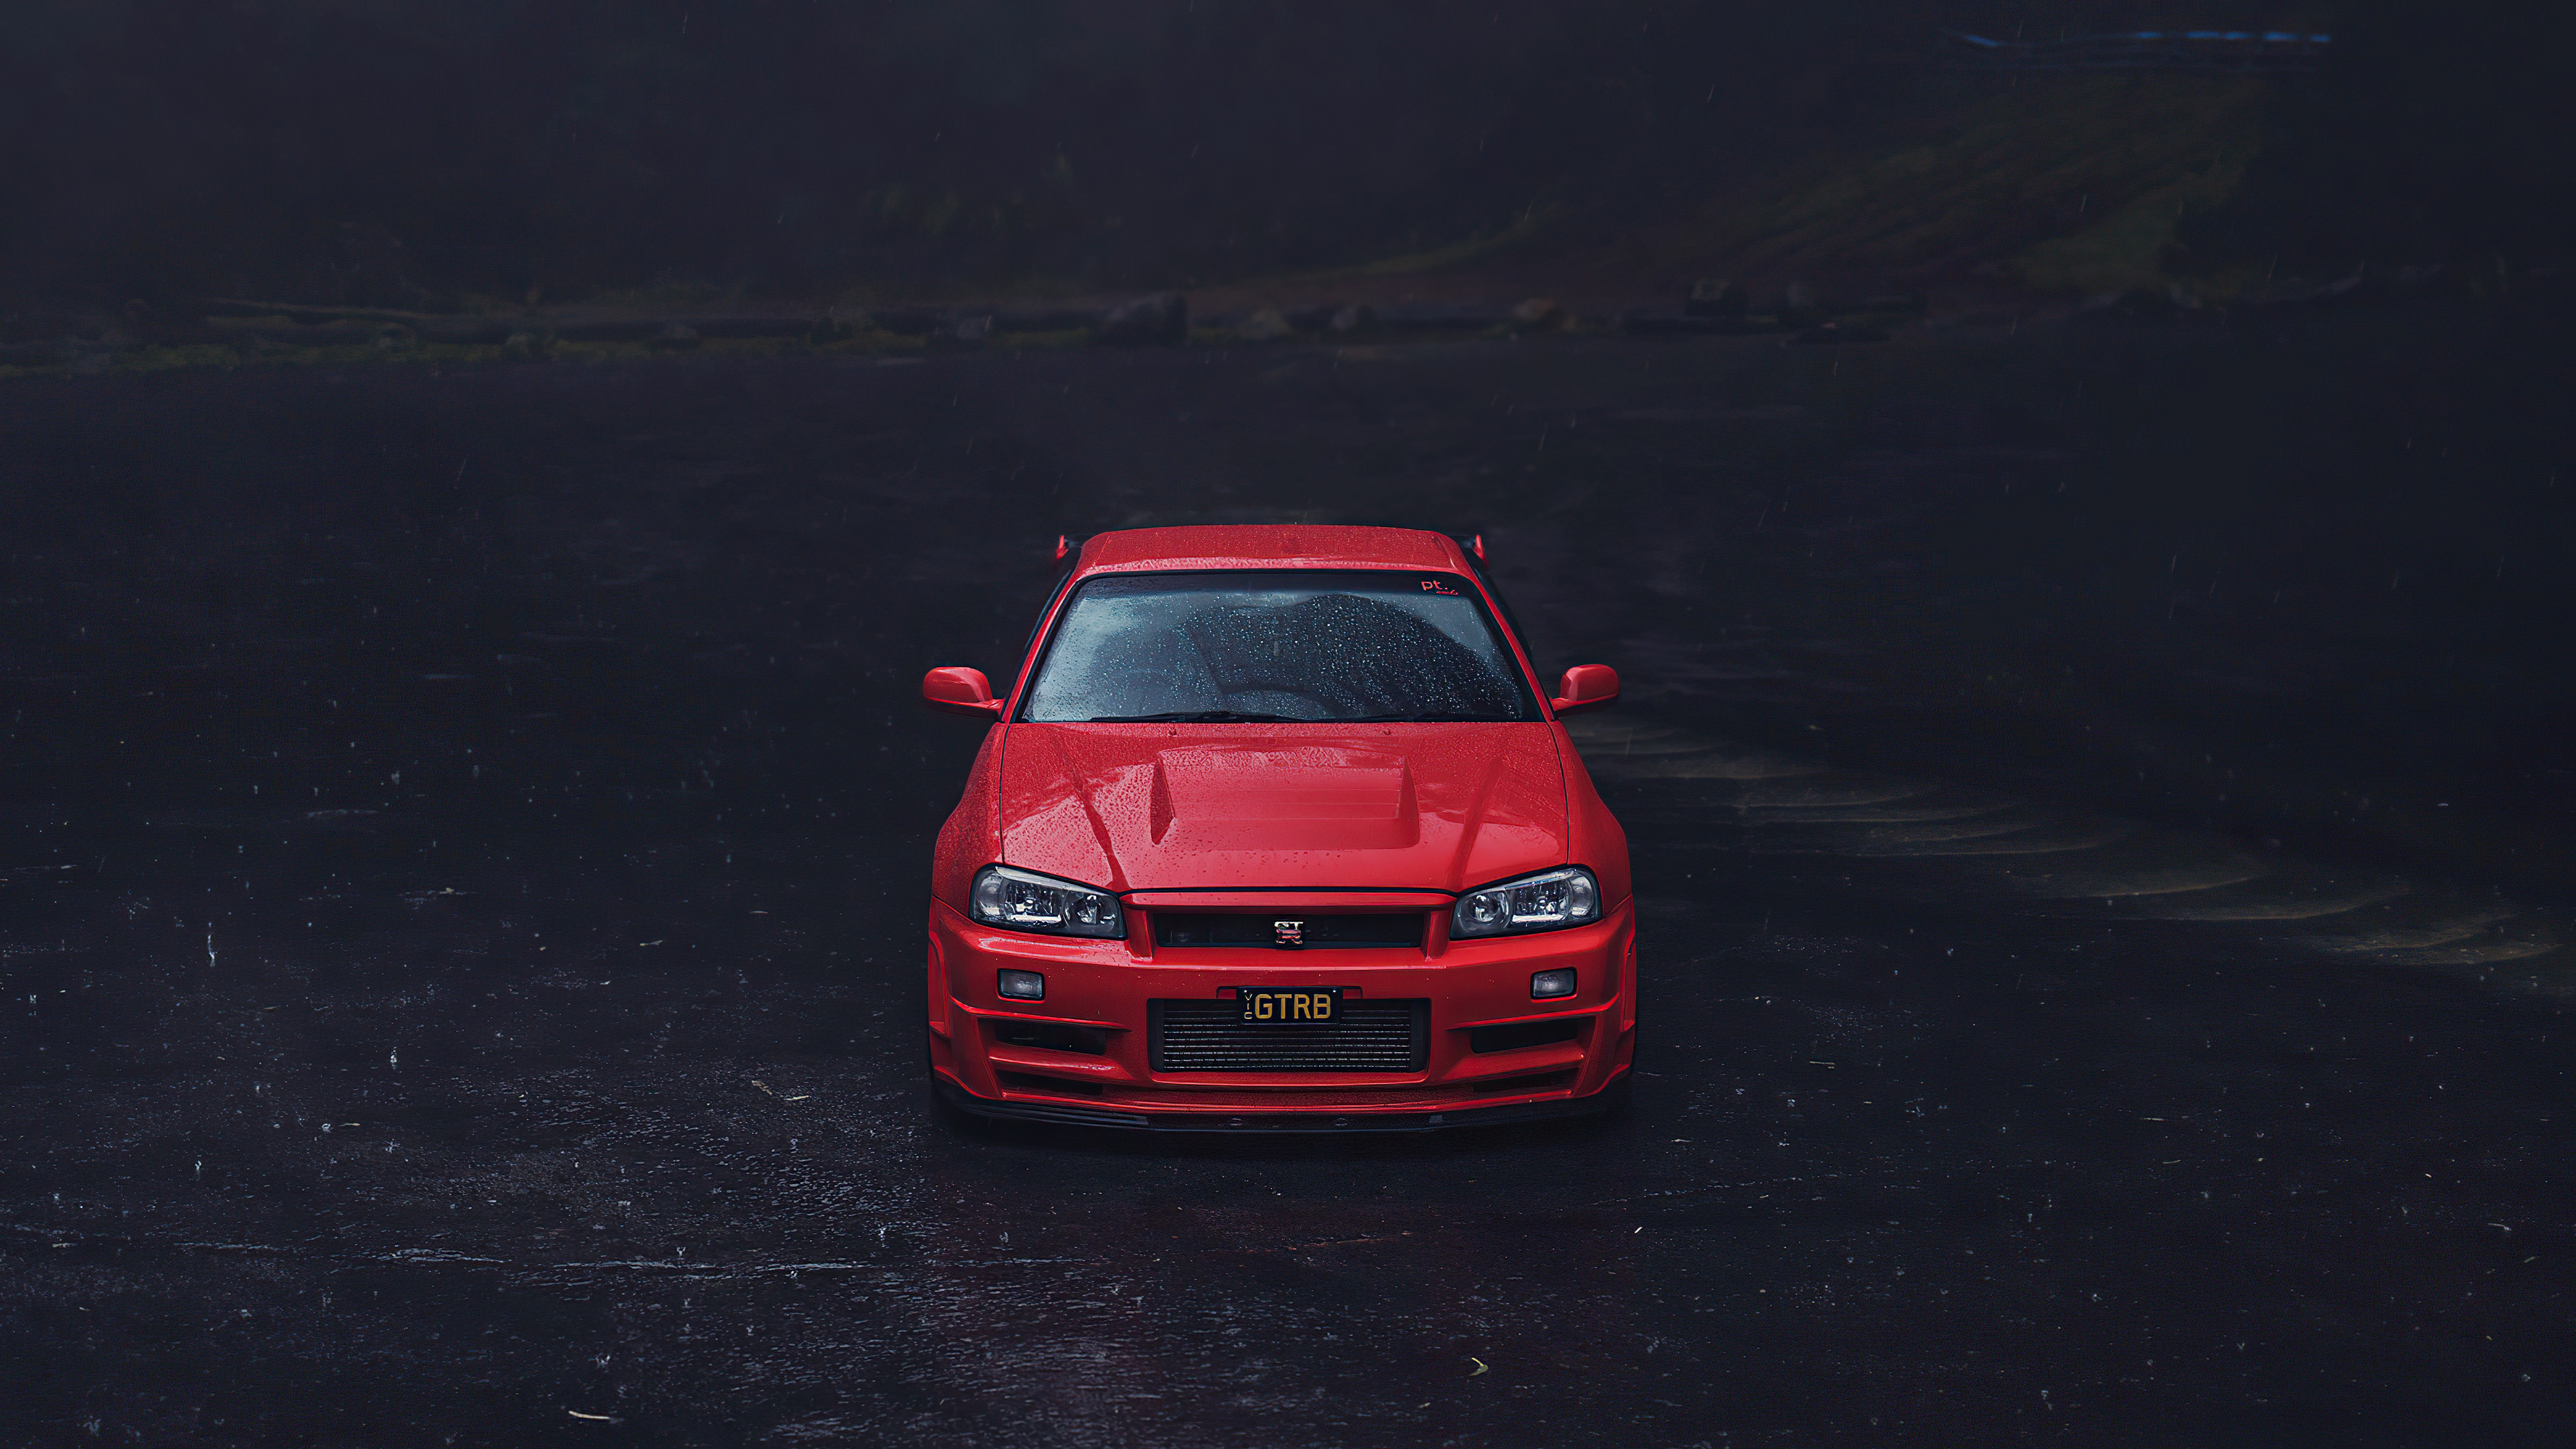 General 5120x2880 Nissan Skyline R34 Nissan Skyline red Nissan car frontal view simple background minimalism red cars Japanese cars